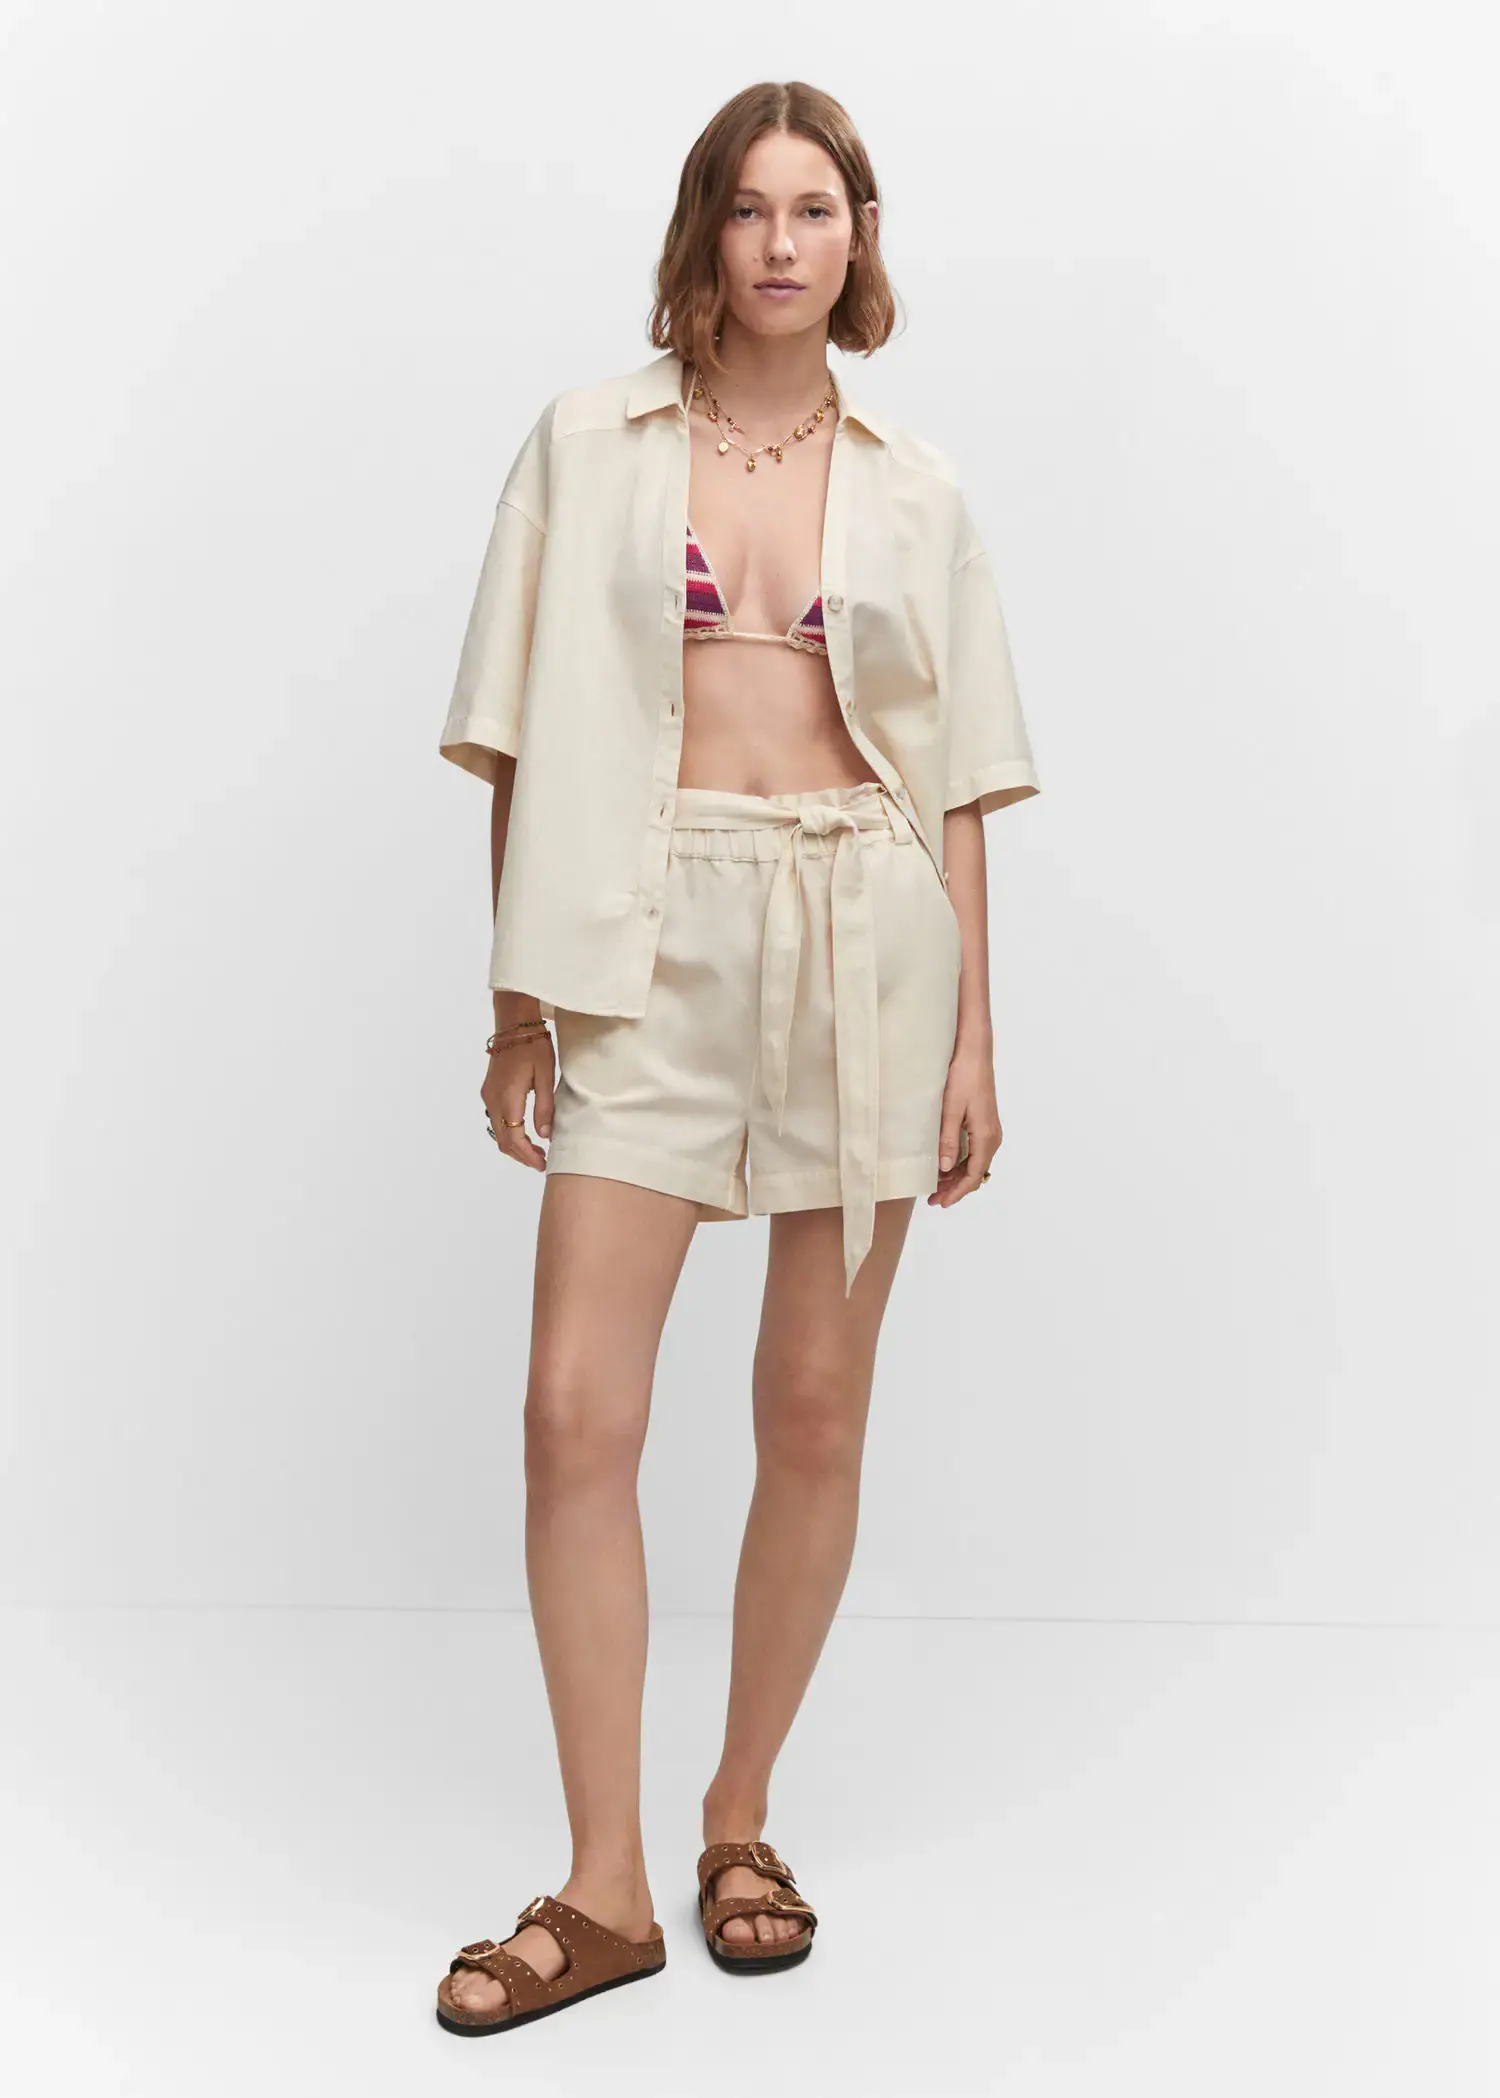 Mango Cotton linen shorts. a woman in a white bathing suit and a white jacket. 